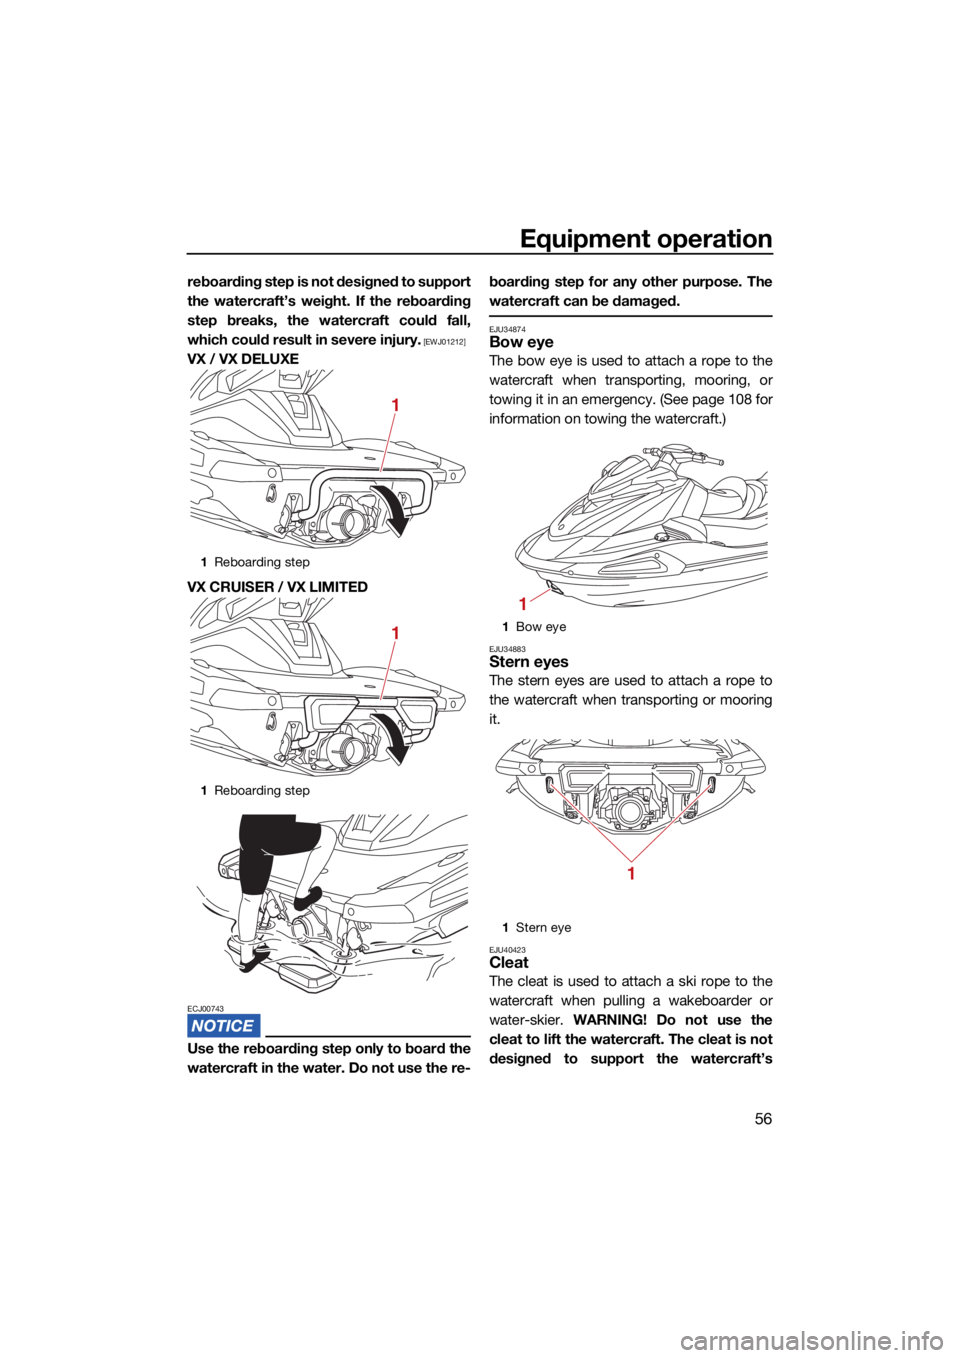 YAMAHA VX CRUISER 2022  Owners Manual Equipment operation
56
reboarding step is not designed to support
the watercraft’s weight. If the reboarding
step breaks, the watercraft could fall,
which could result in severe injury.
 [EWJ01212]
